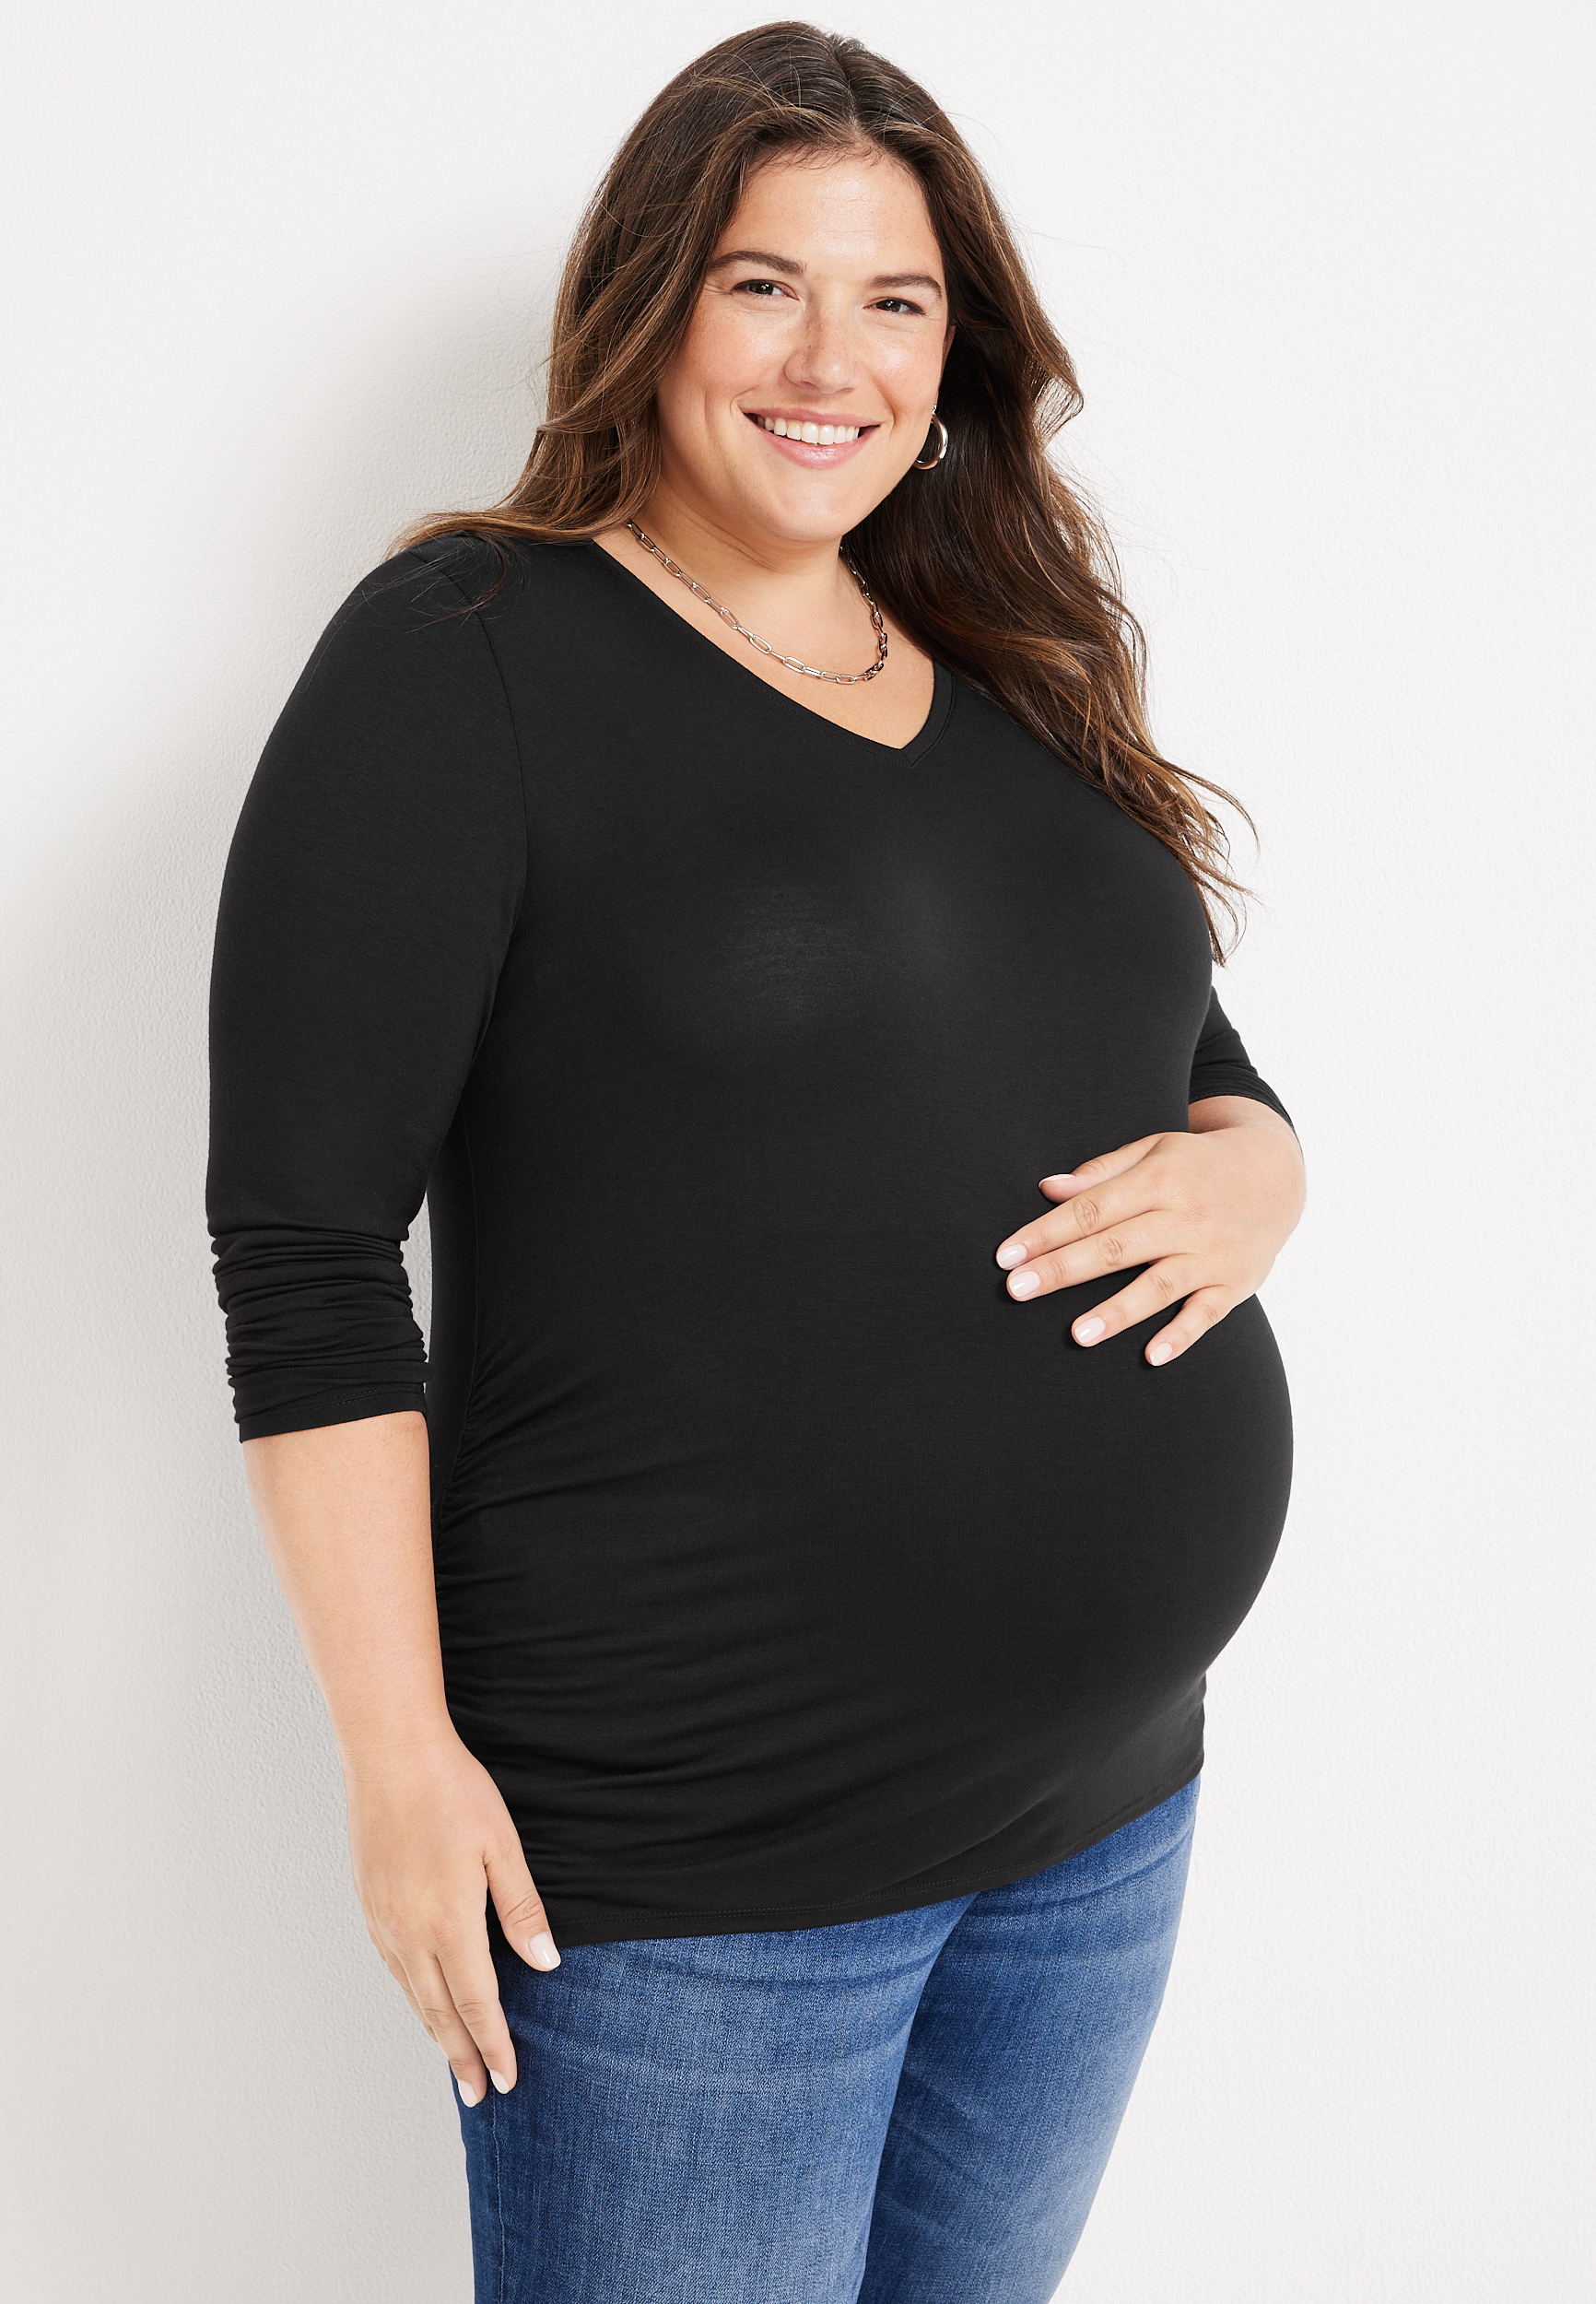 Plus Size Maternity Clothes, Pregnancy Clothing